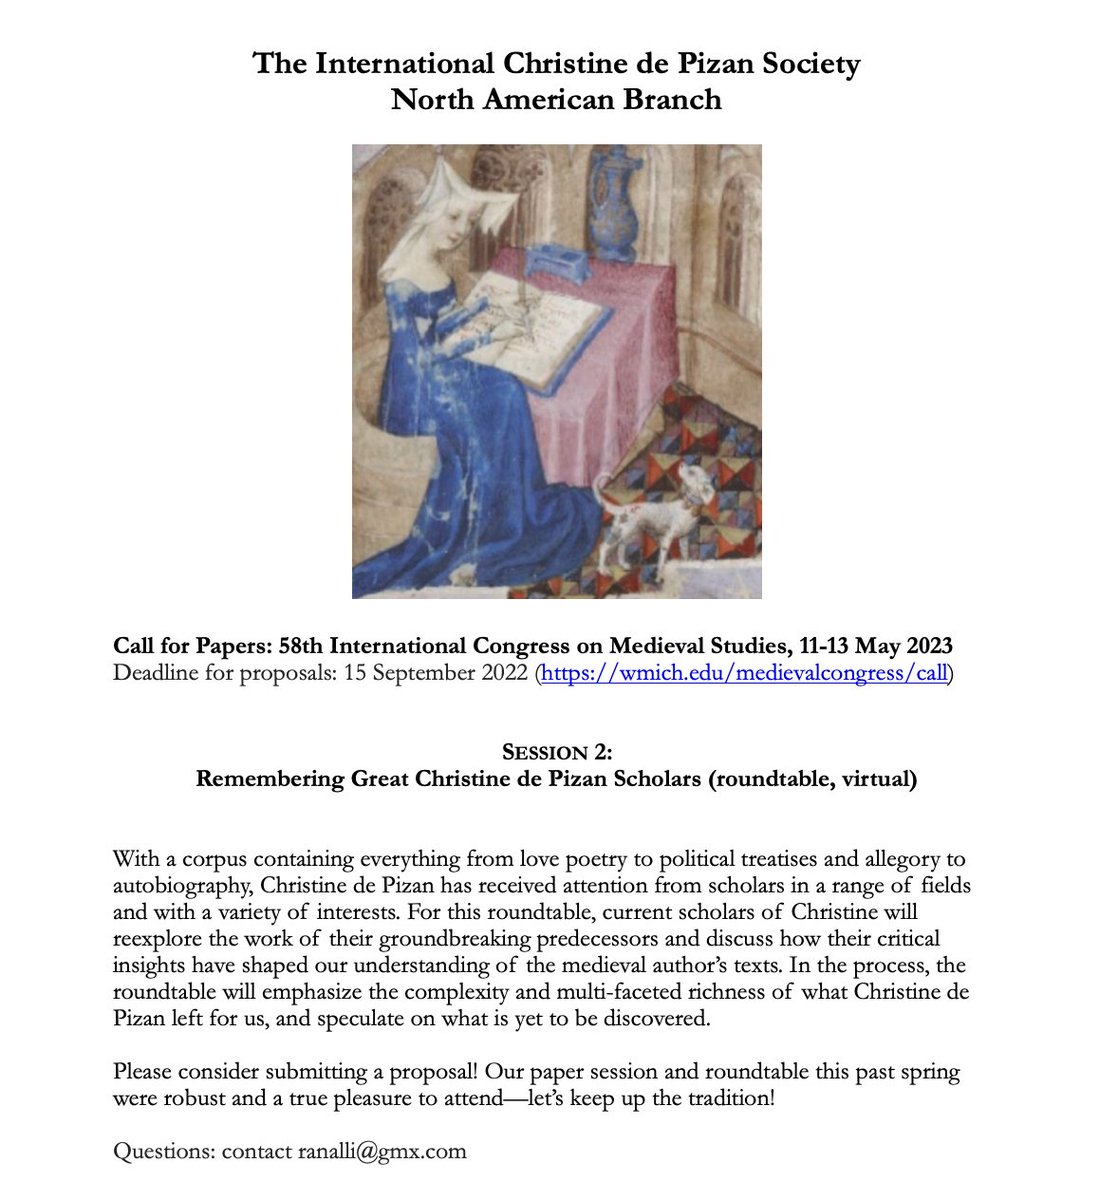 CFP: The International Christine de Pizan Society—NA Branch will sponsor *2* sessions @ @KzooICMS 2023

Session 2:
Remembering Great Christine de Pizan Scholars (roundtable, virtual format)

#medievaltwitter #ICMS2023 #CFP